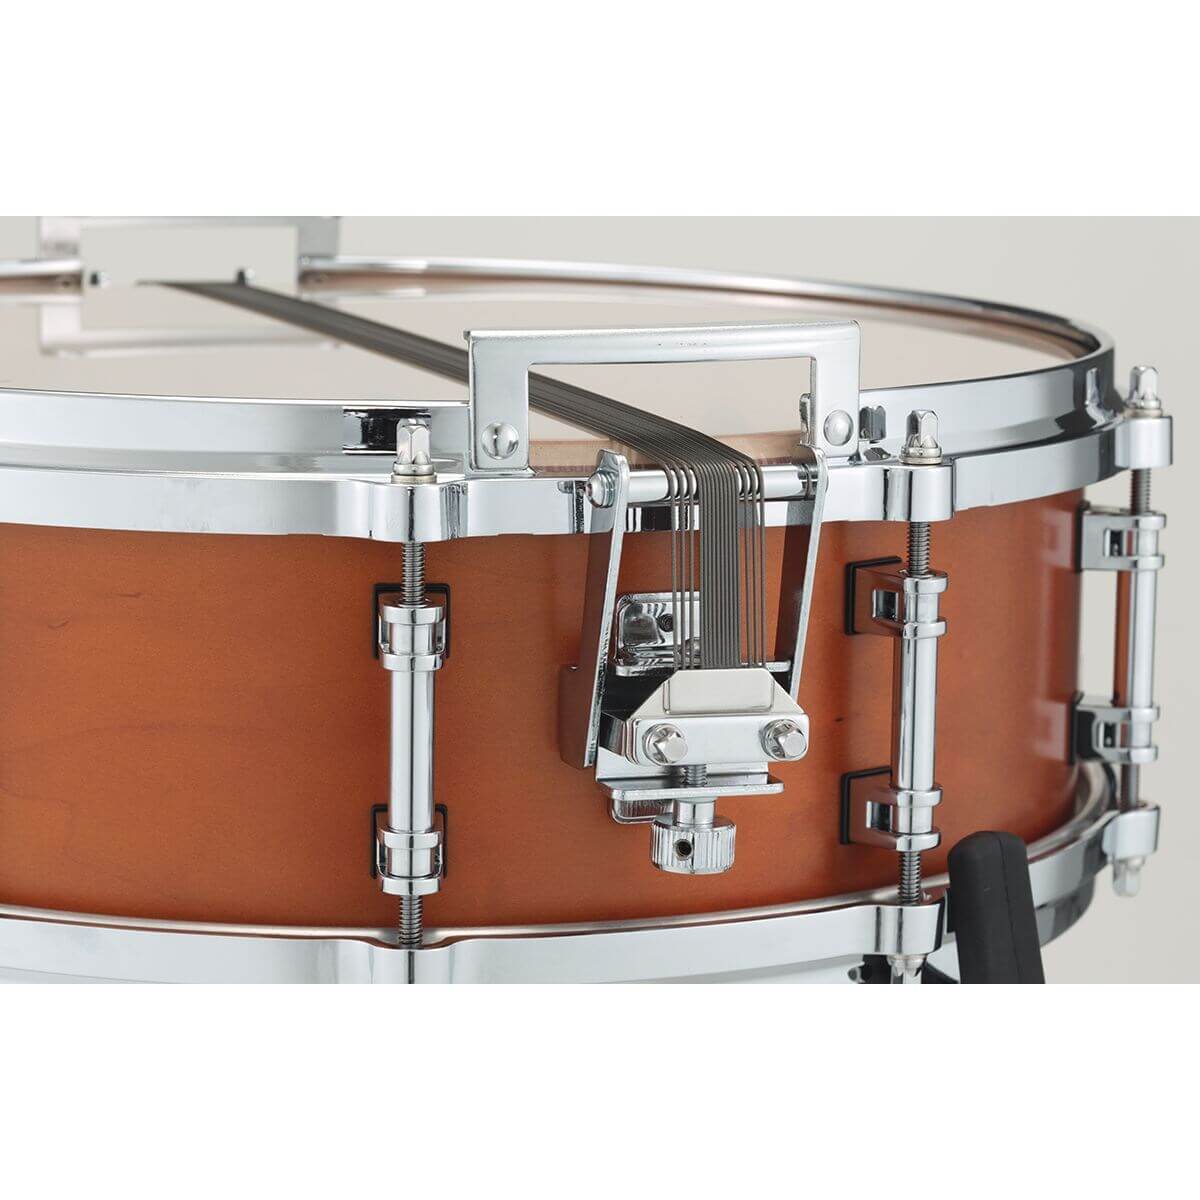 Yamaha Orchestral Maple Snare Drum 14x6.5